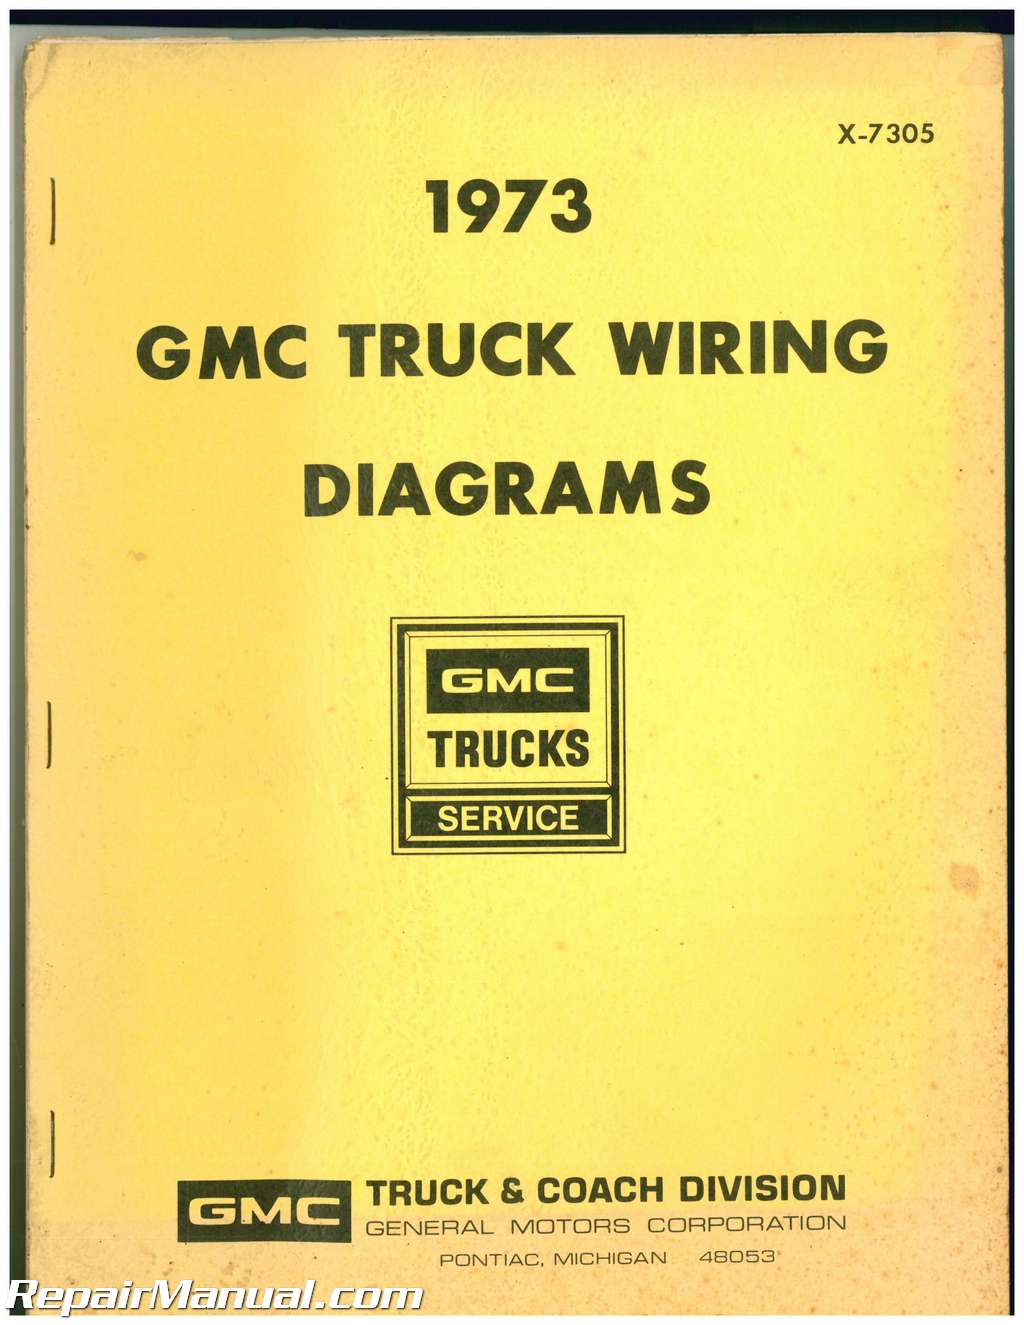 Used 1973 Gmc Truck Wiring Diagrams